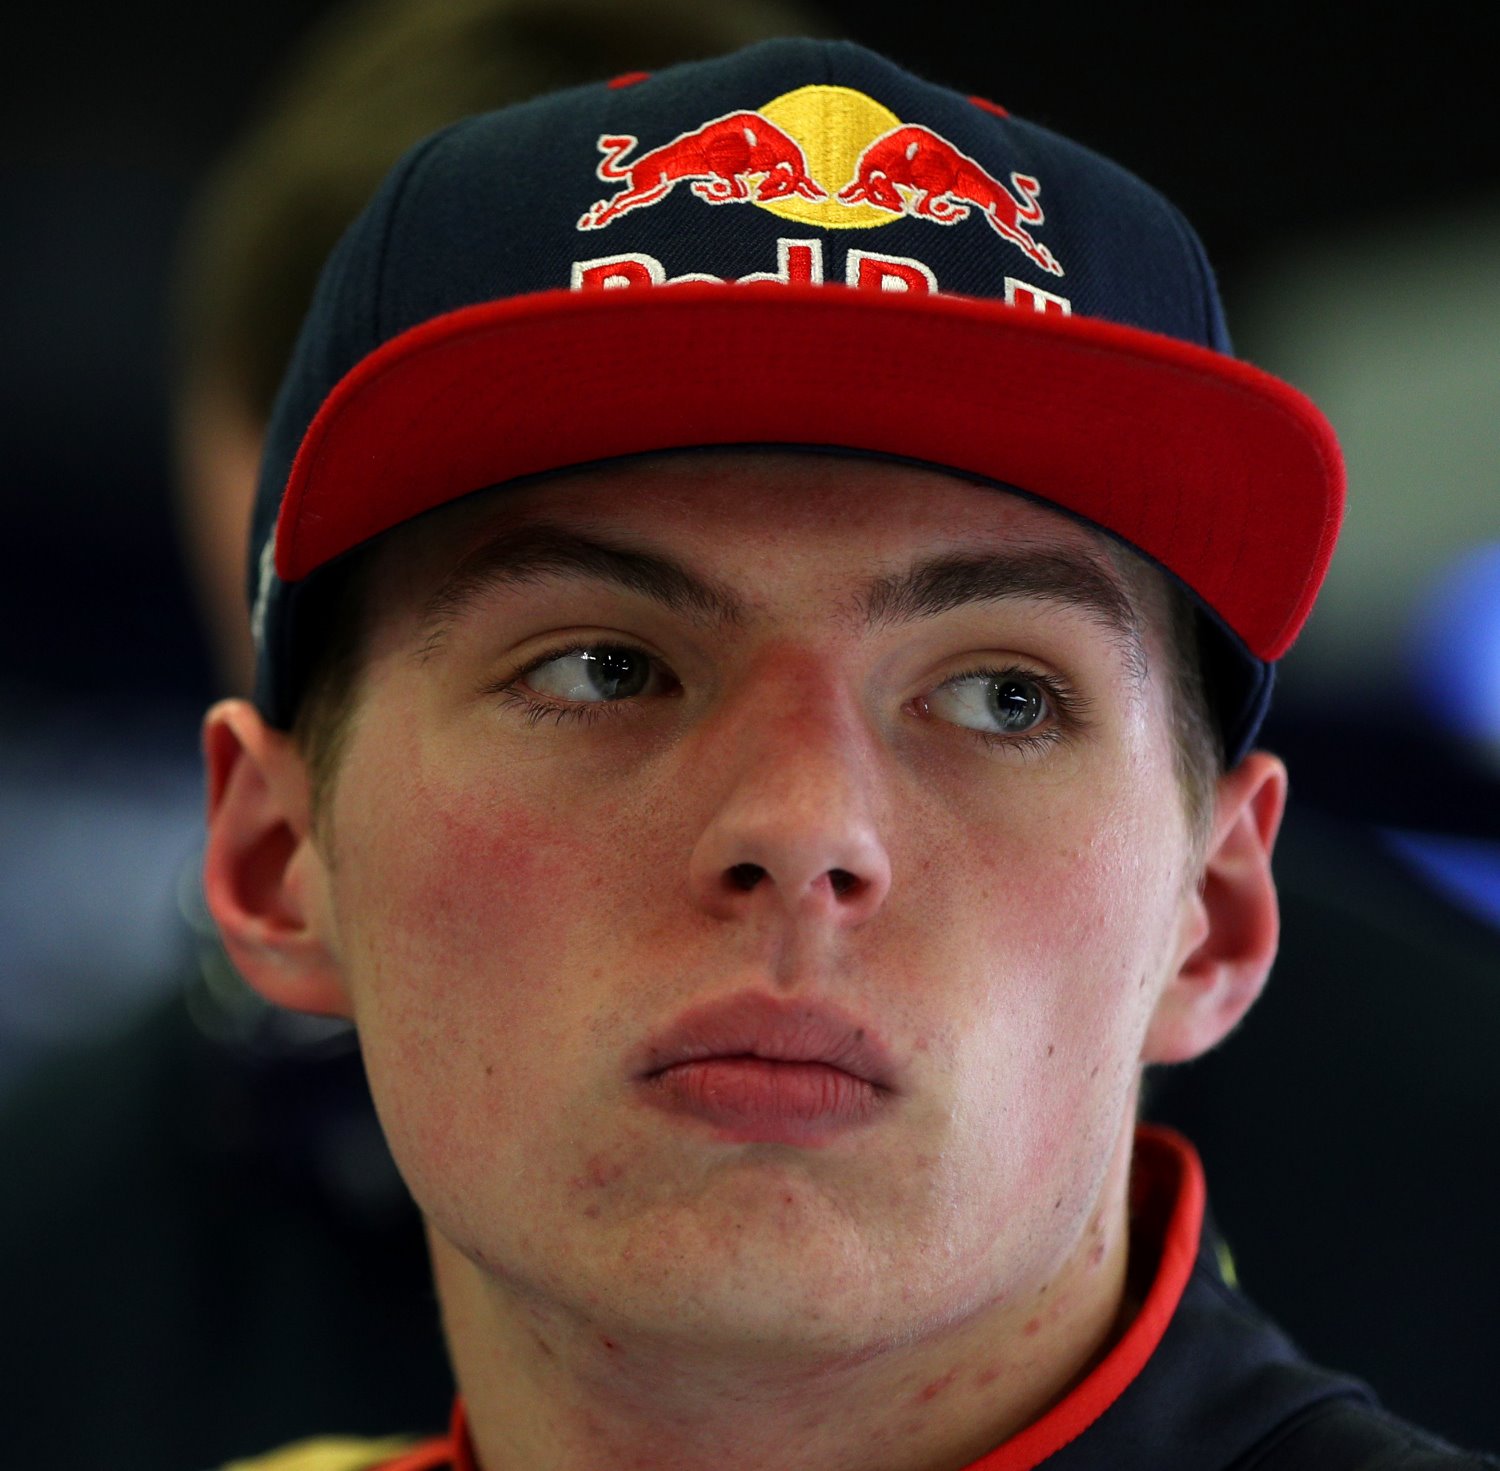 Verstappen eyes podium in Canada, if he can just avoid crashing